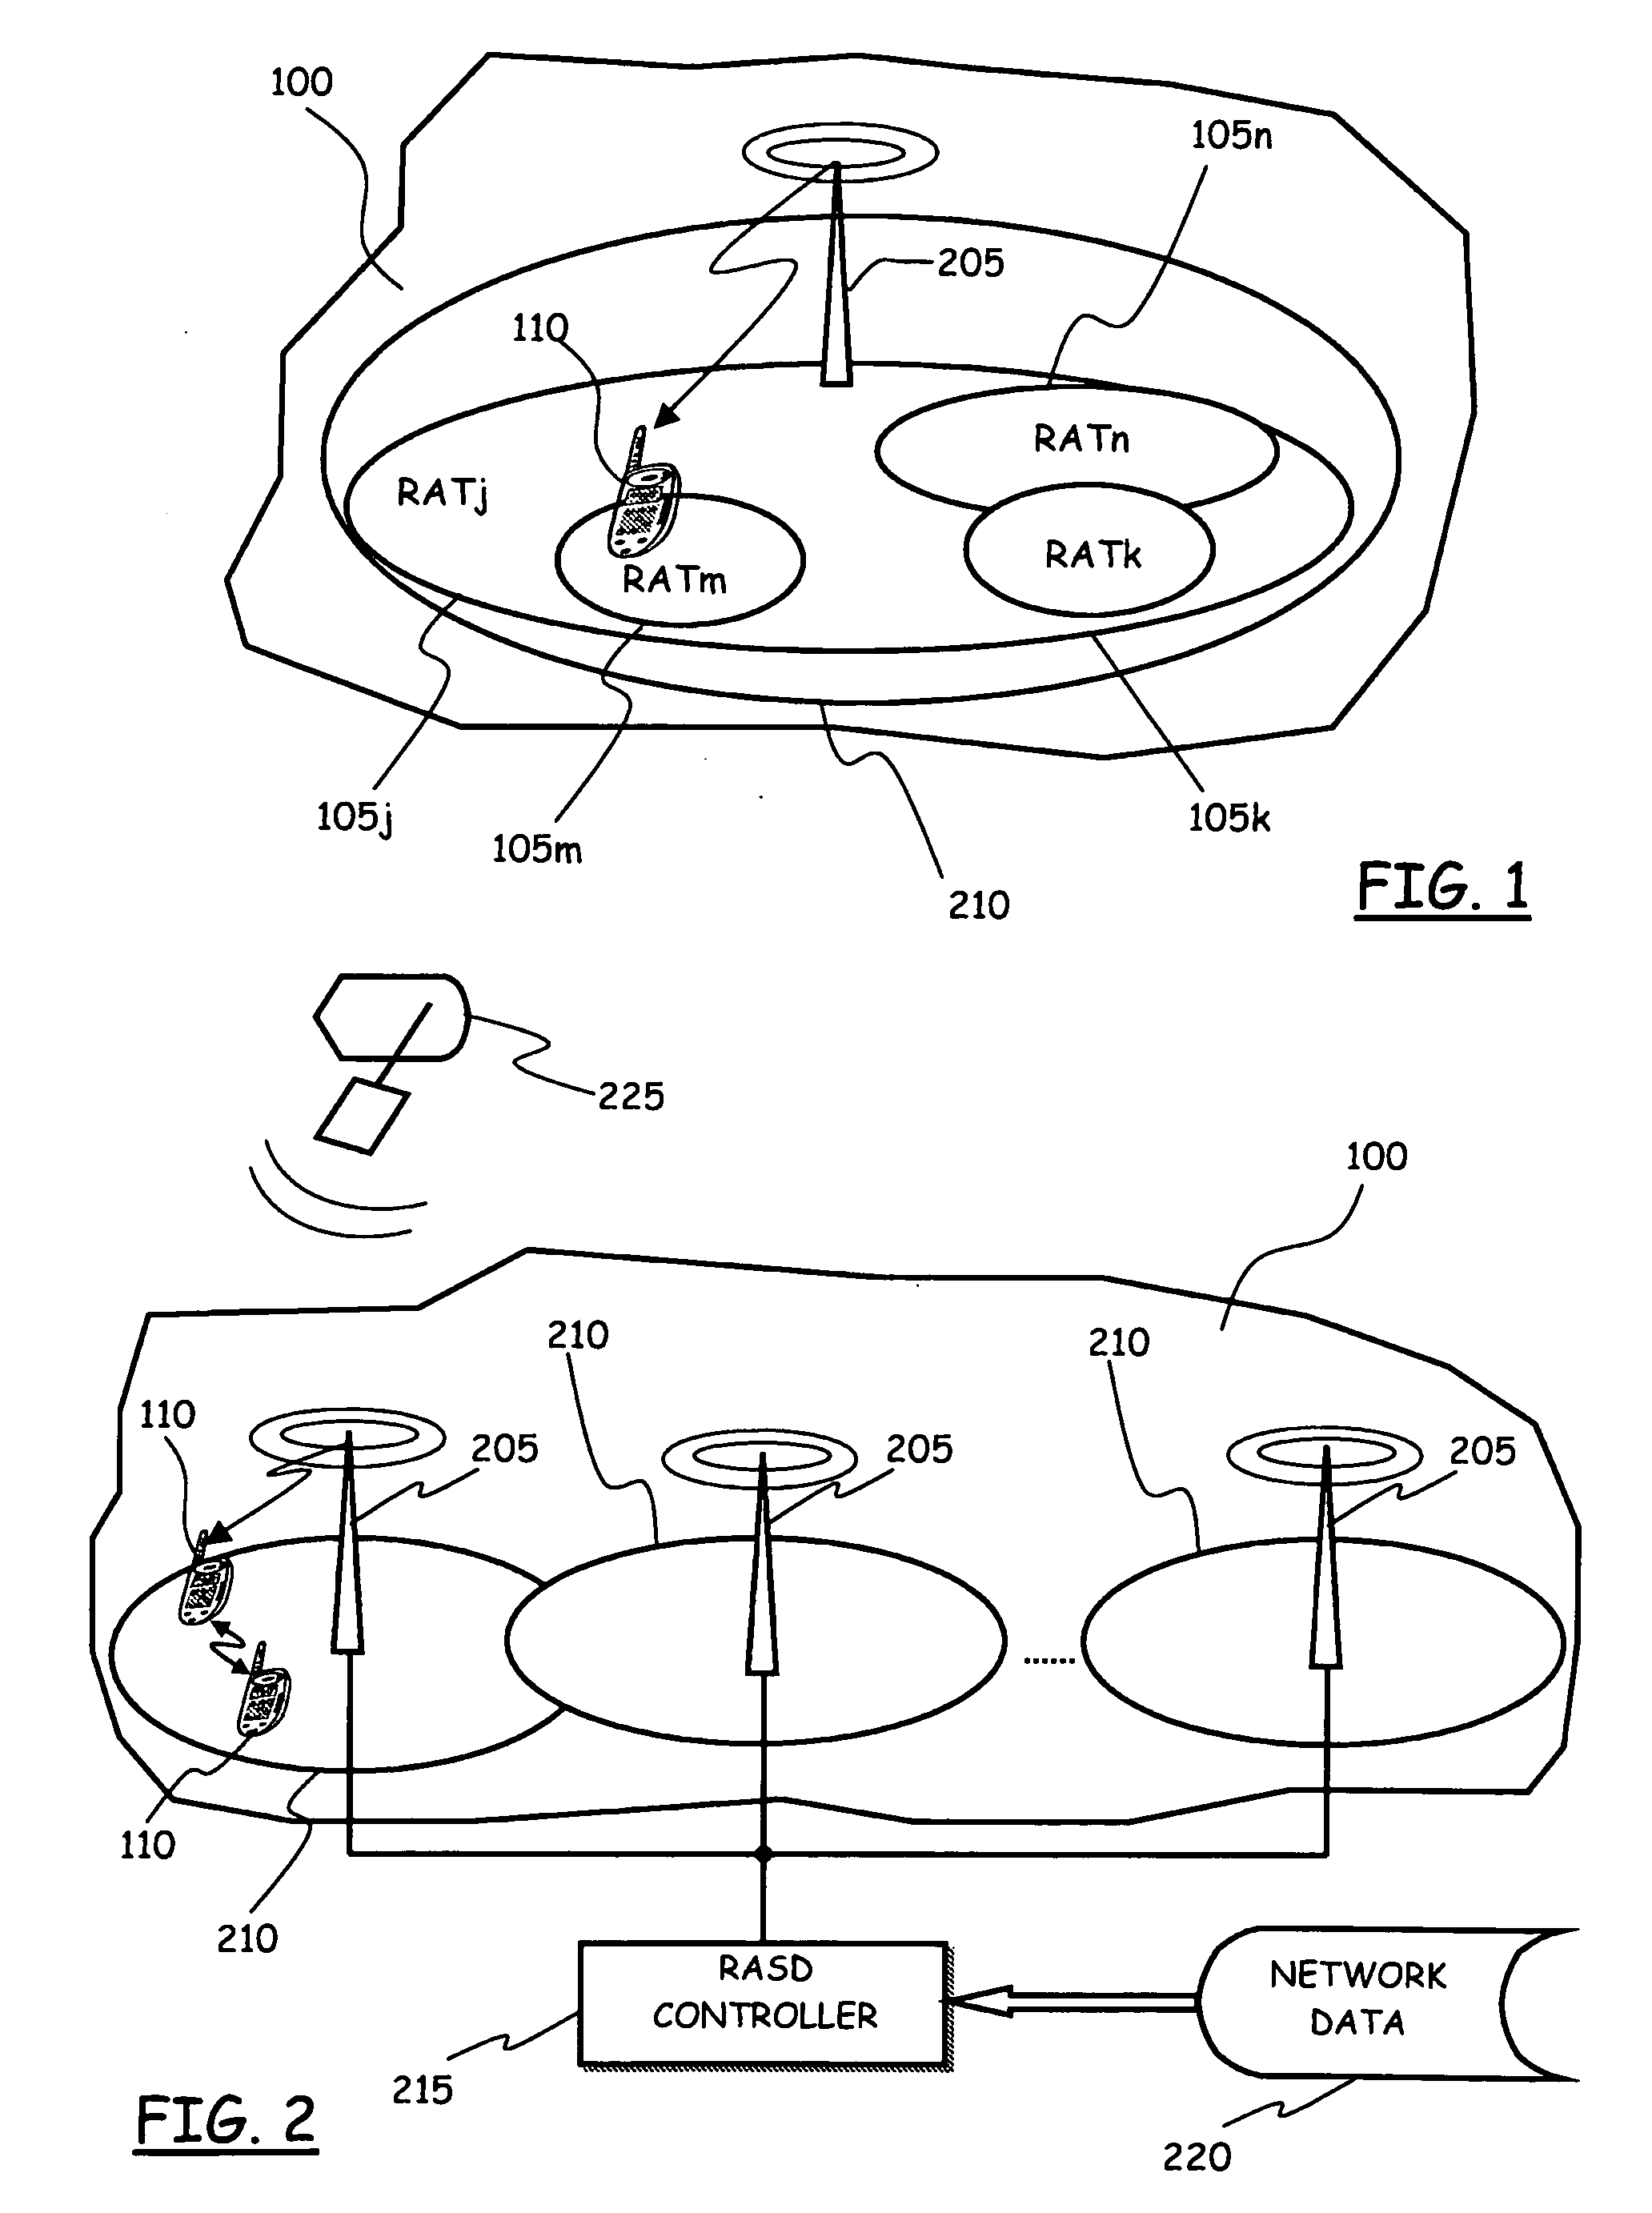 Method and system for enabling connection of a mobile communication terminal to a radio communication network